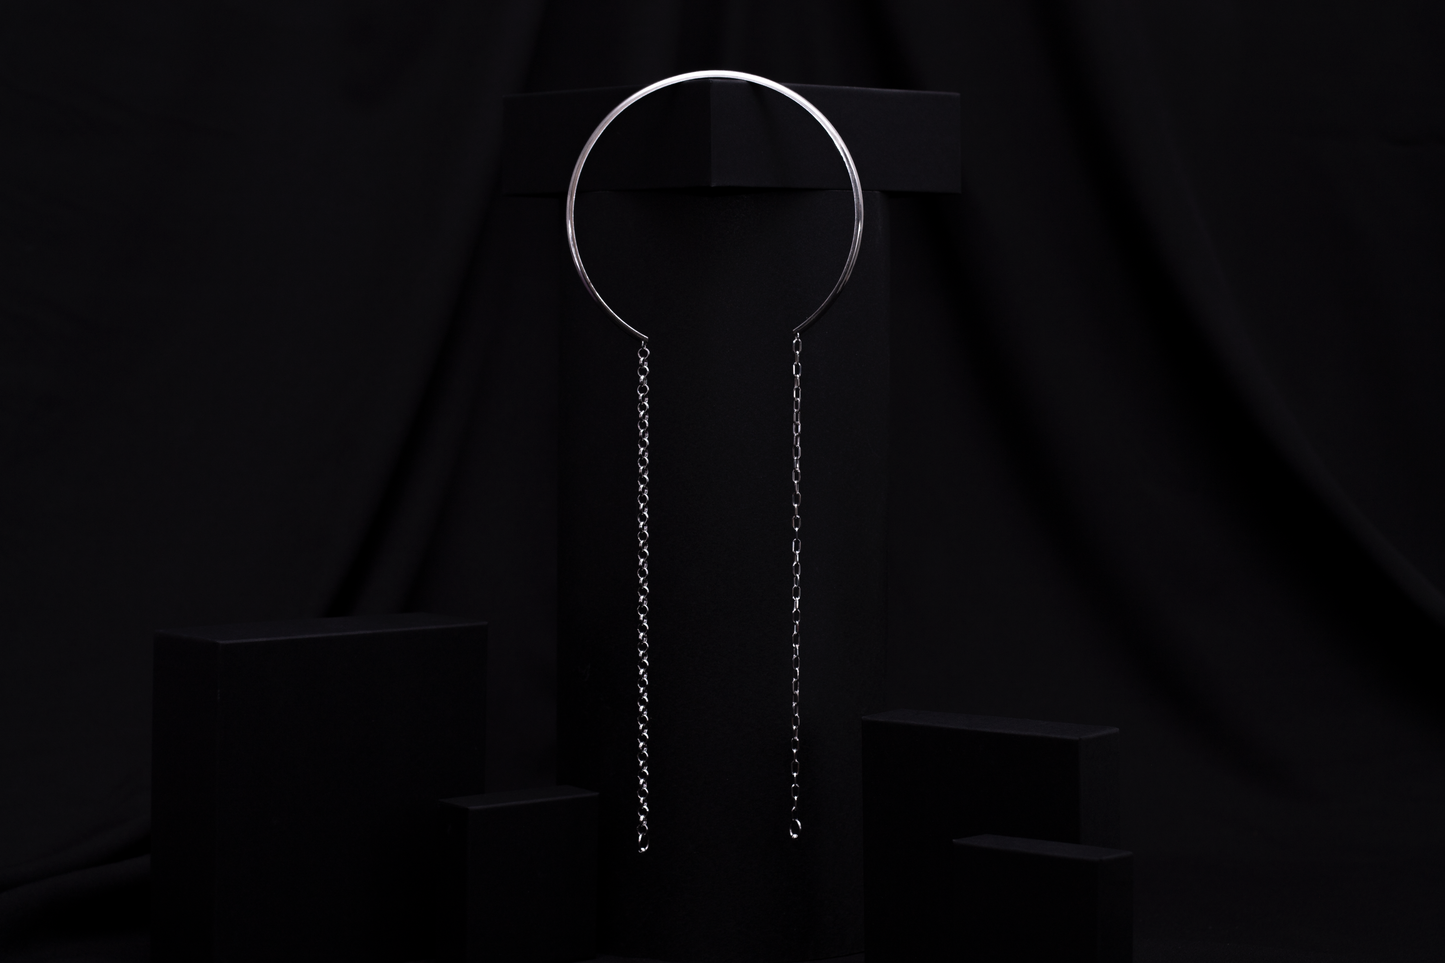 Displayed against a black backdrop, this Myril Jewels piece features a rigid, minimal necklace with long hanging chains, encapsulating the essence of minimal goth. This refined item is ideal for adding an avant-garde touch to any outfit, suitable for everyday wear or as a distinctive accessory for special events like festivals.